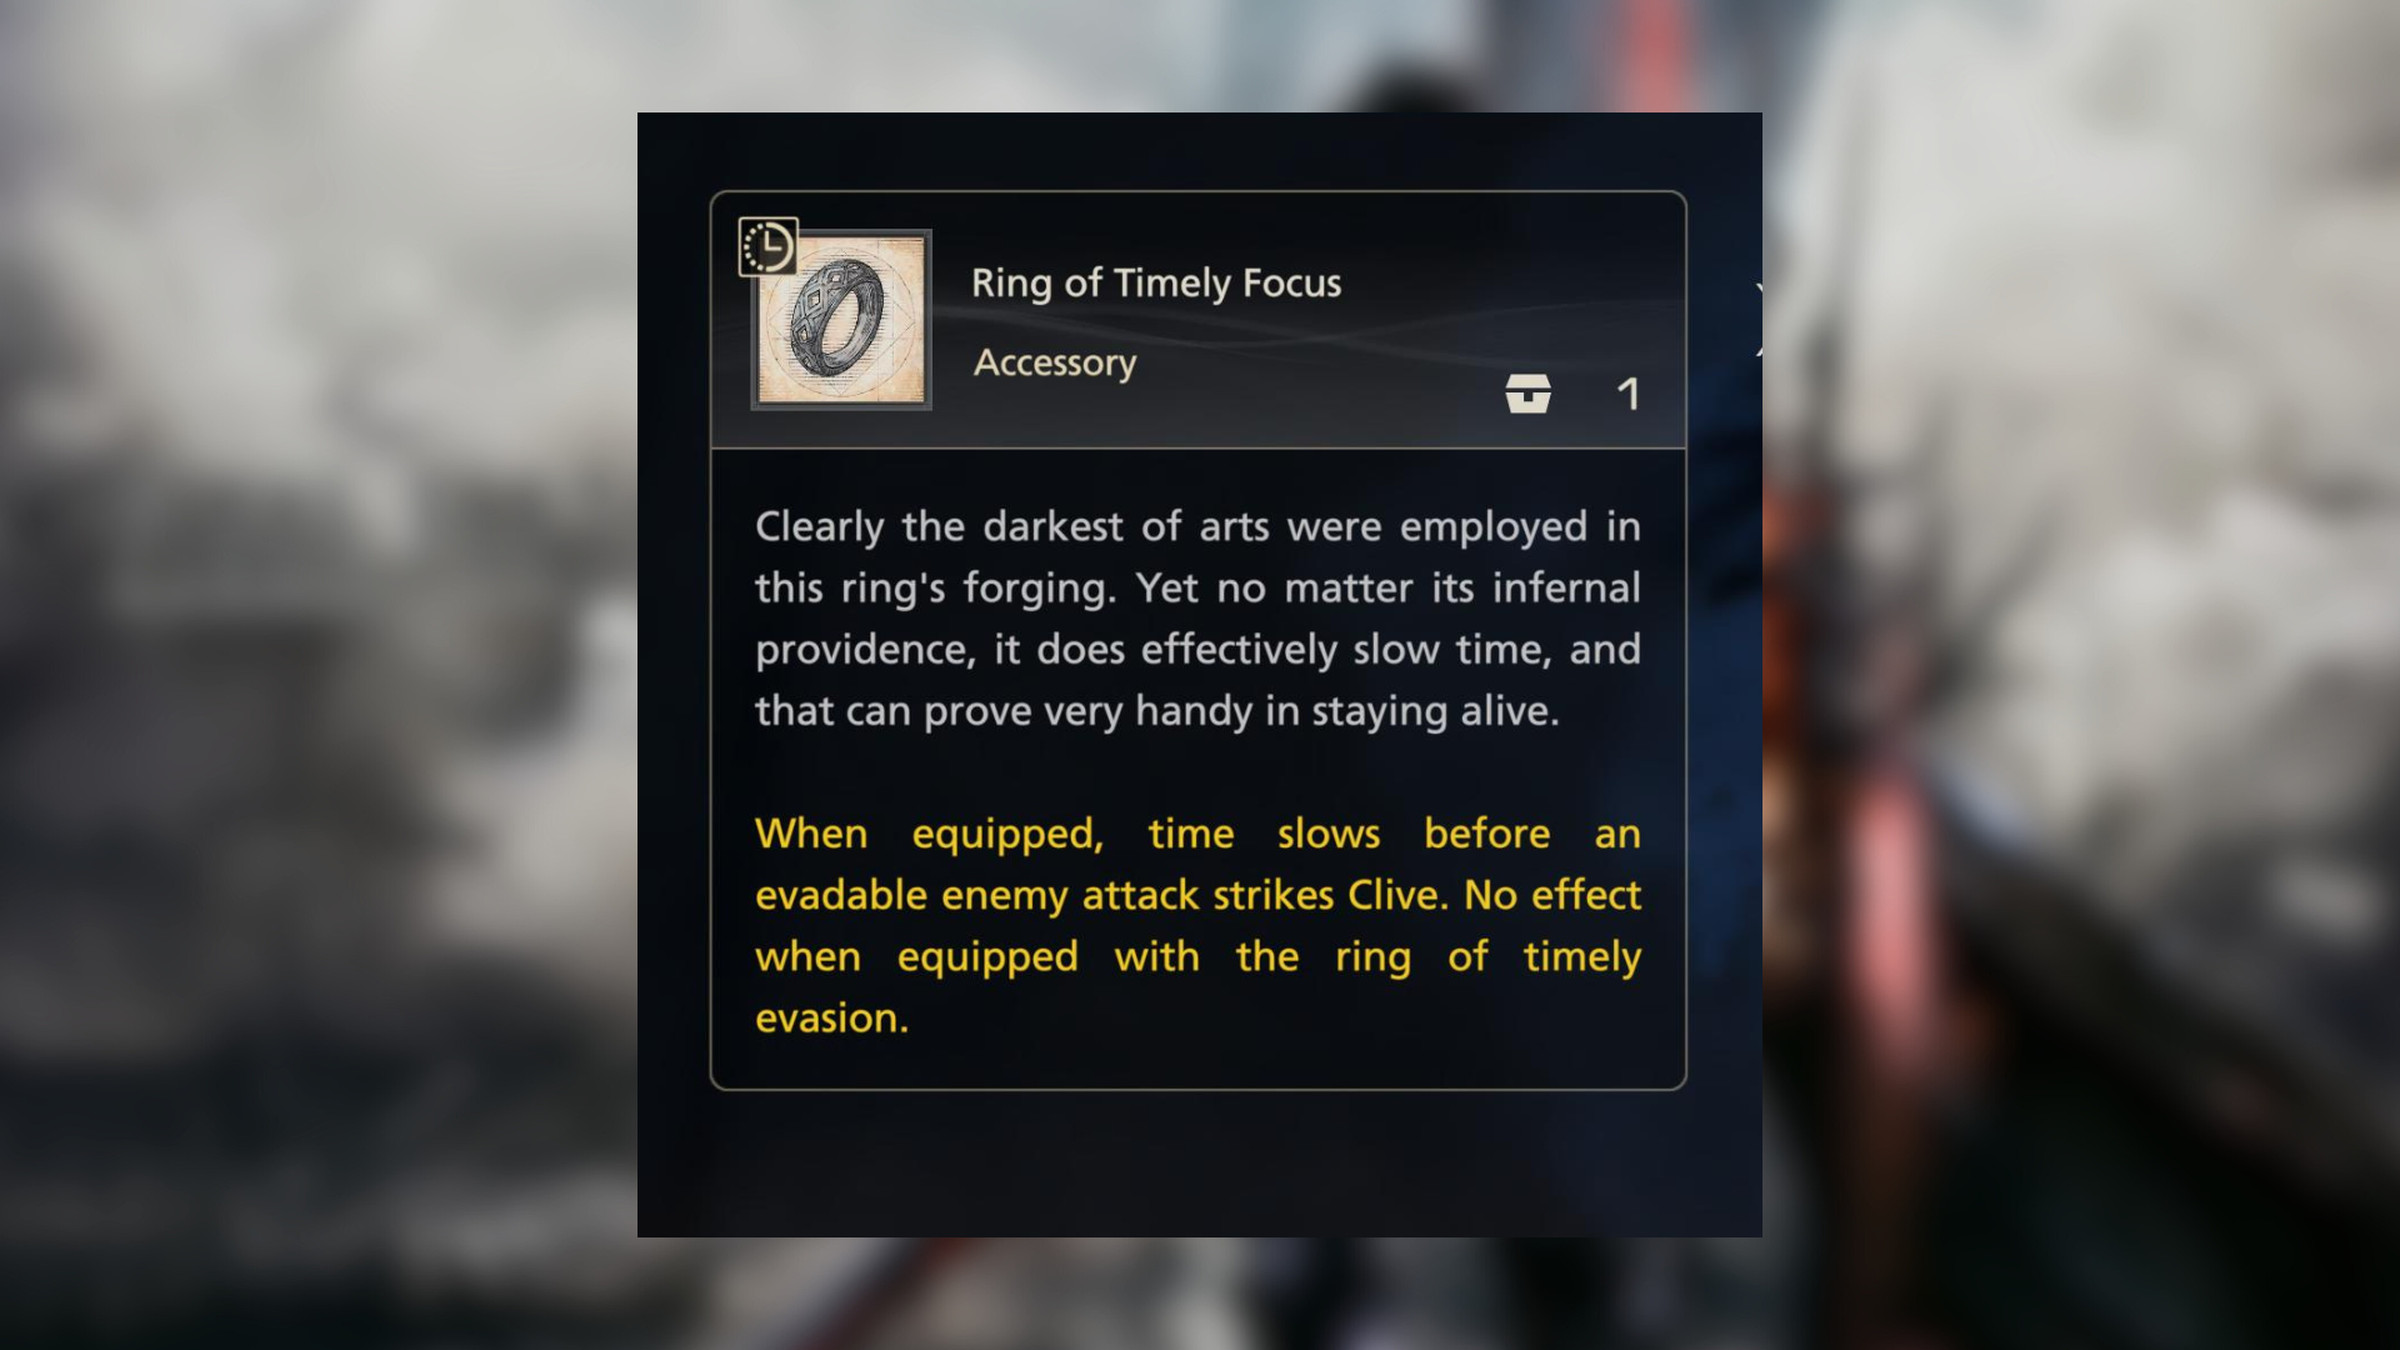 Screenshot from Final Fantasy XVI featuring a description of the Ring of Timely Focus. The text reads: Clearly the darkest of arts were employed in this ring’s forging. Yet no matter its infernal providence, it does effectively slow time, and that can prove very handy in staying alive. Effects: When equipped, time slows before an evadable enemy attack strikes Clive. No effect when equipped with the ring of timely evasion. 